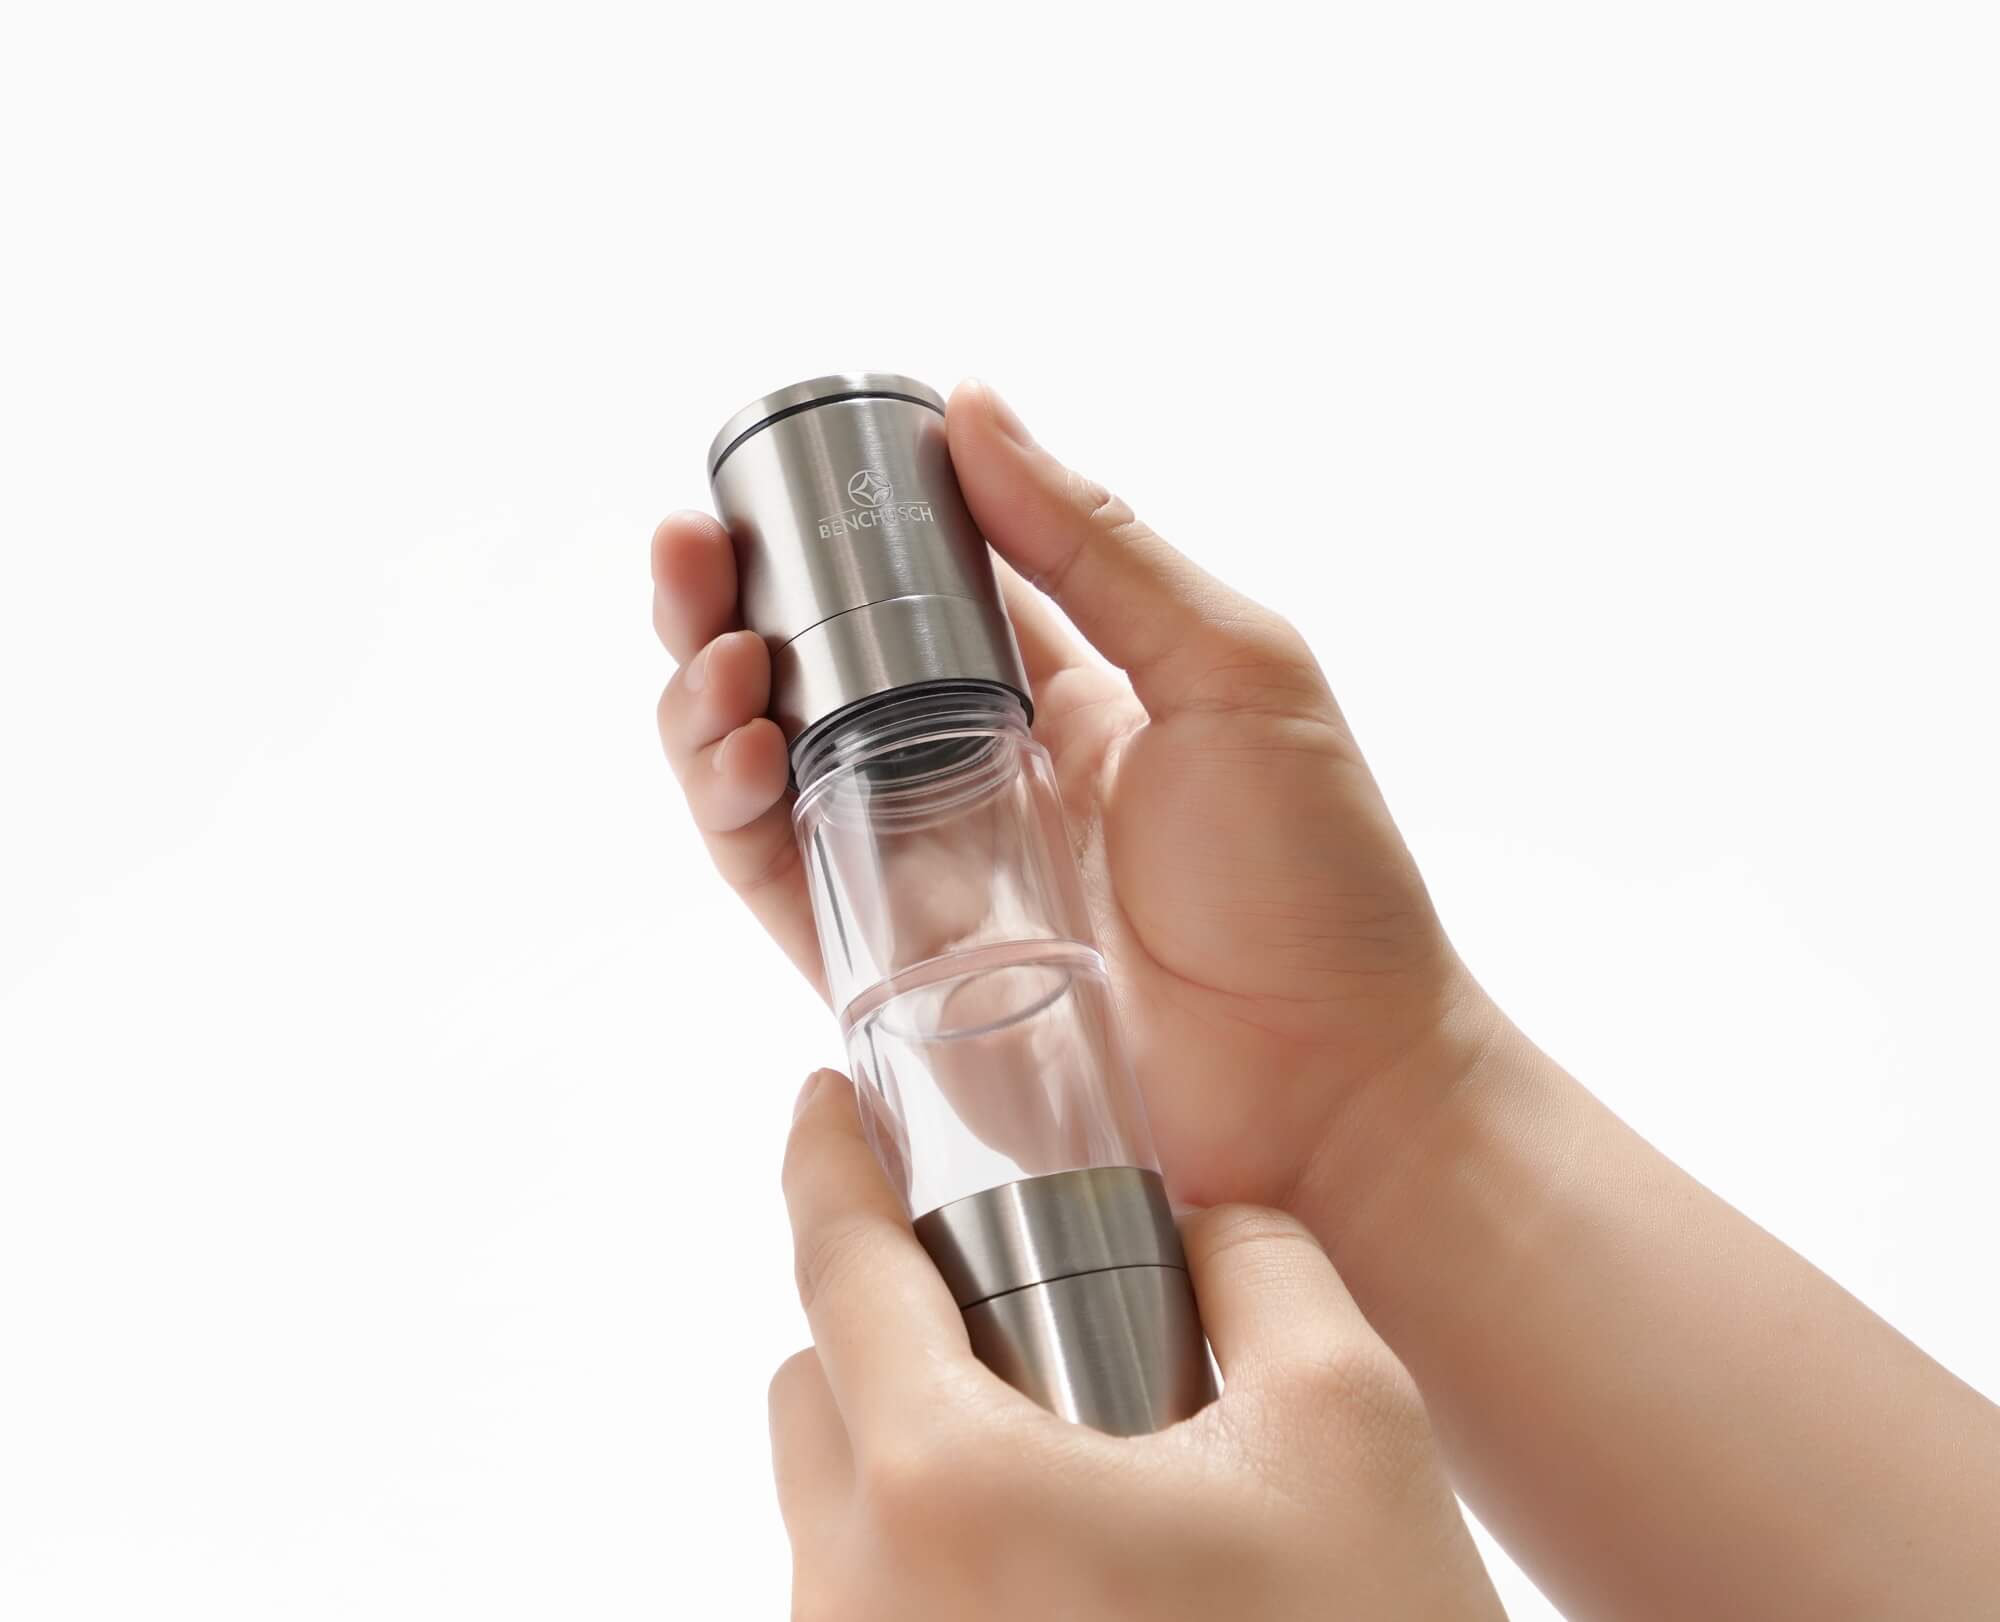 Opening the cover of Benchusch Compact 2 in 1 Salt and Pepper Grinder